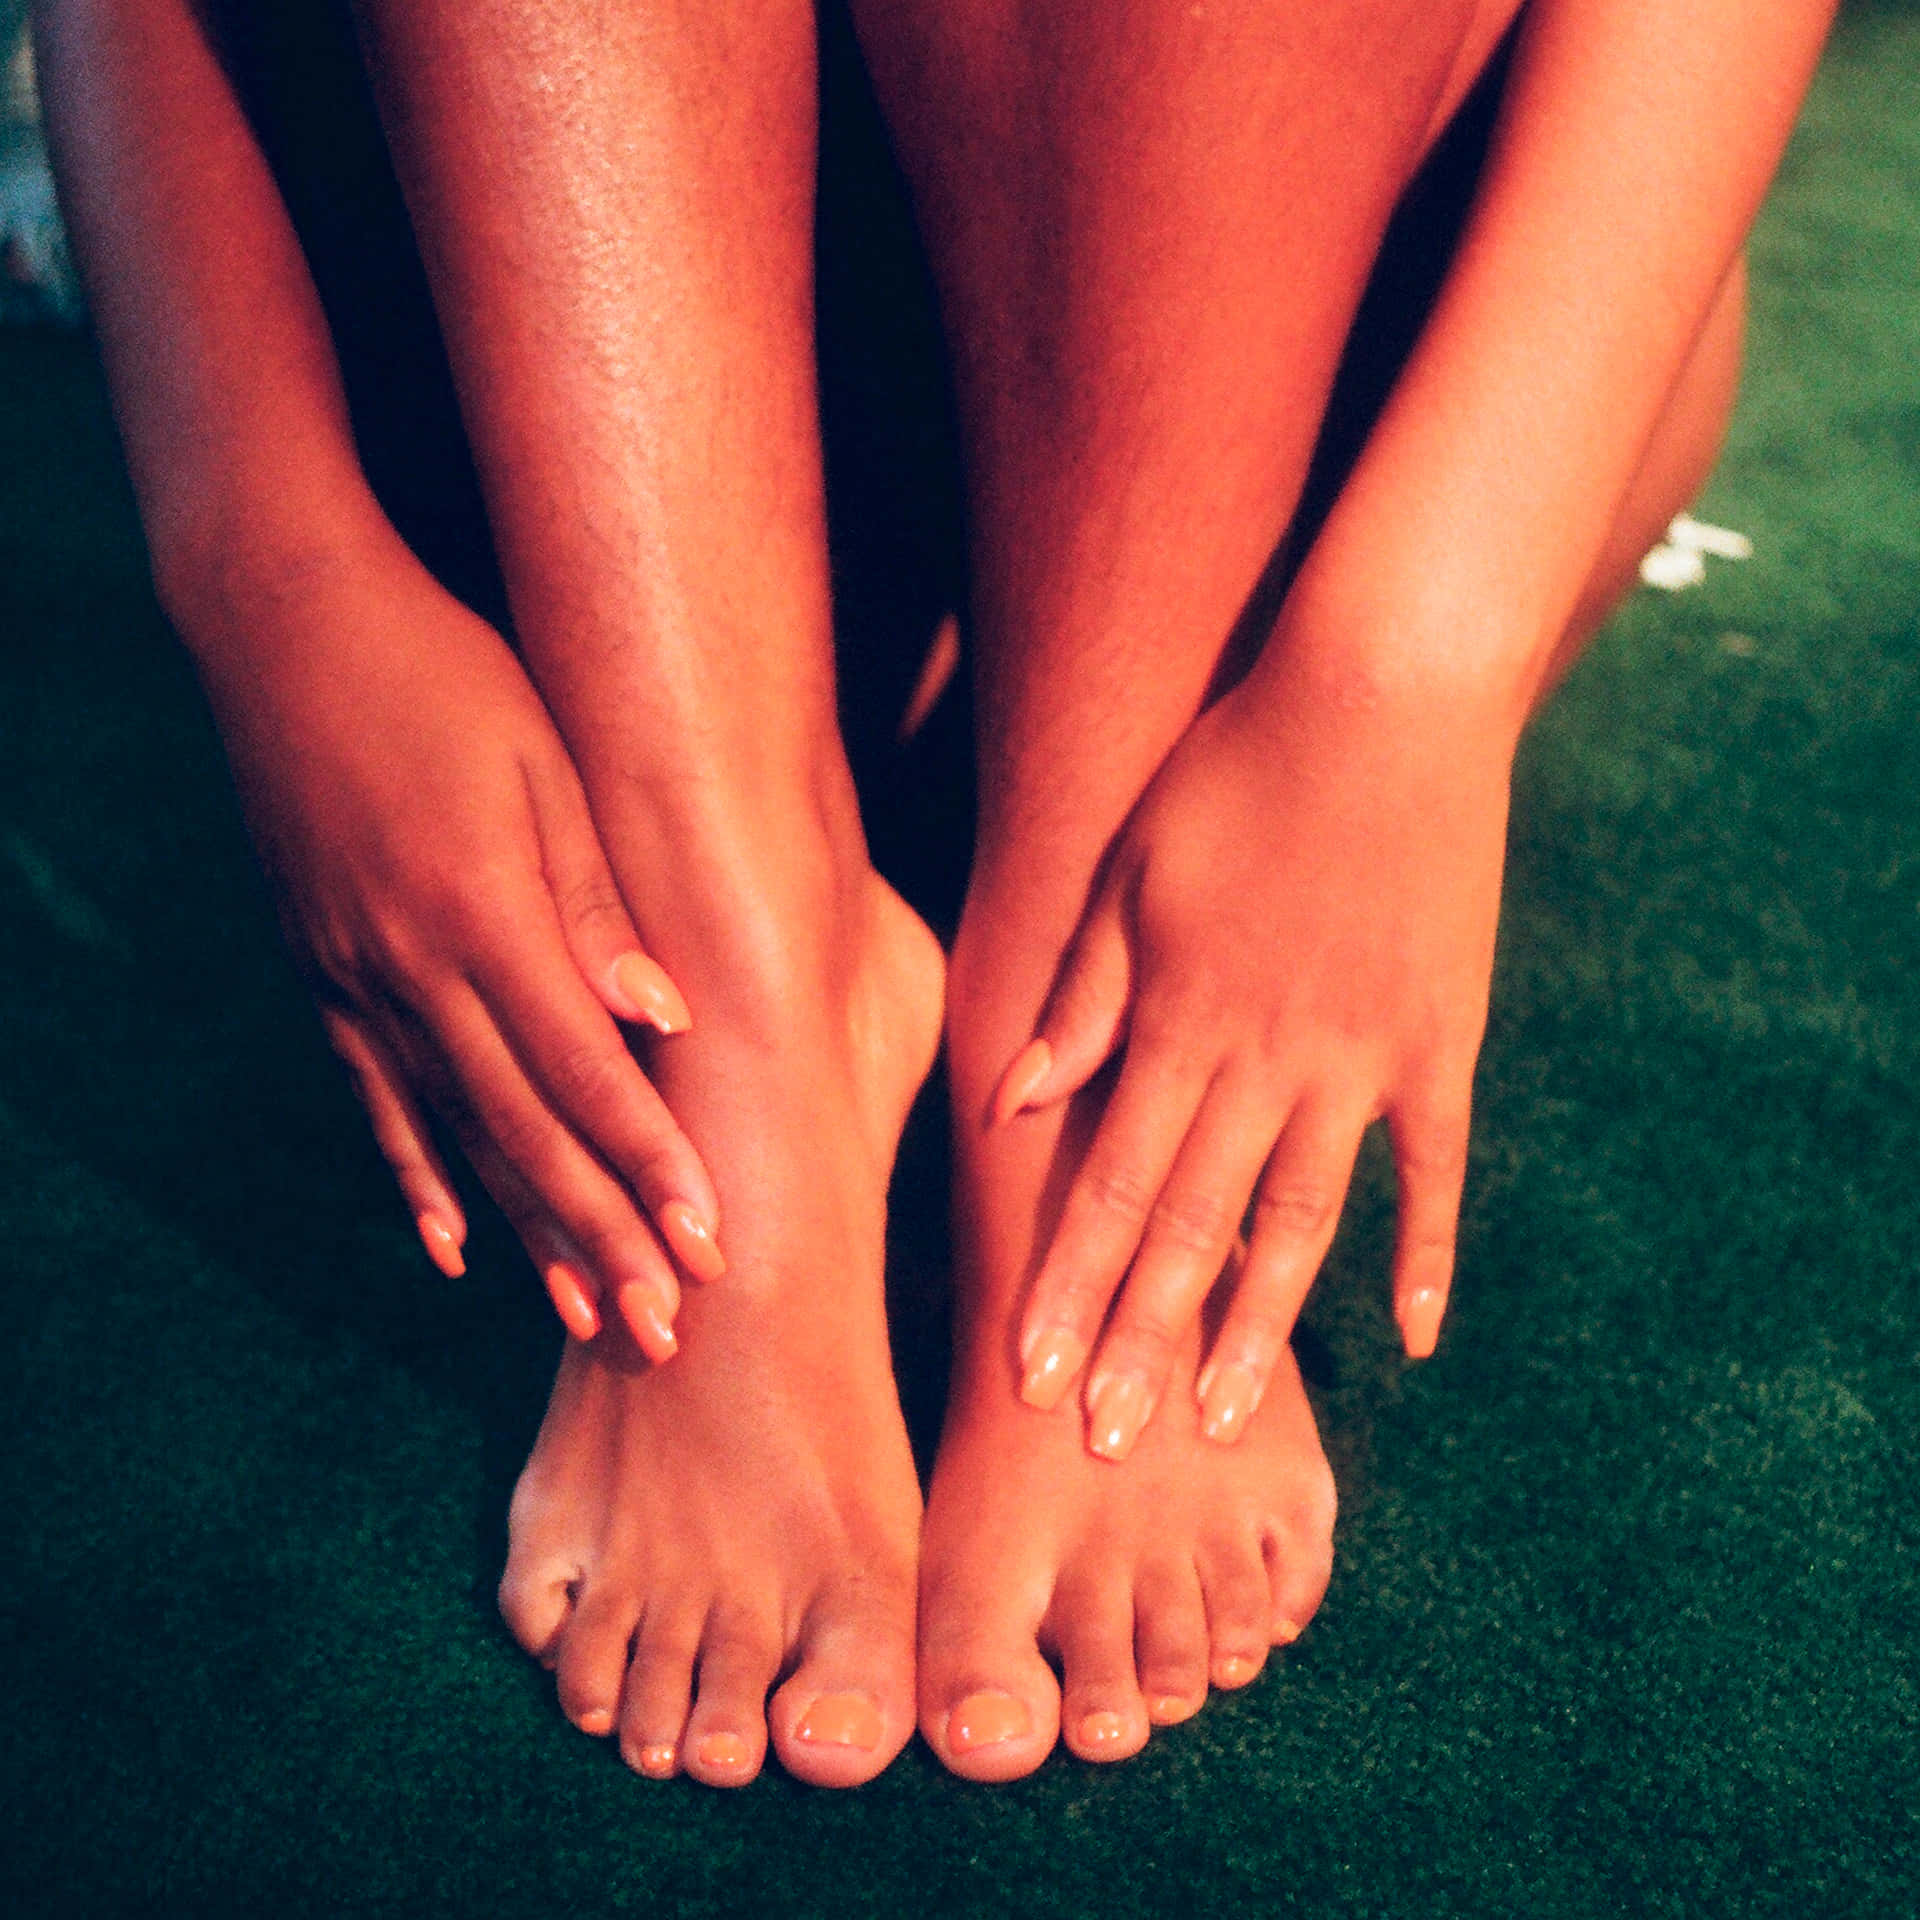 Woman Showing Hands And Feet After Pedicure Picture